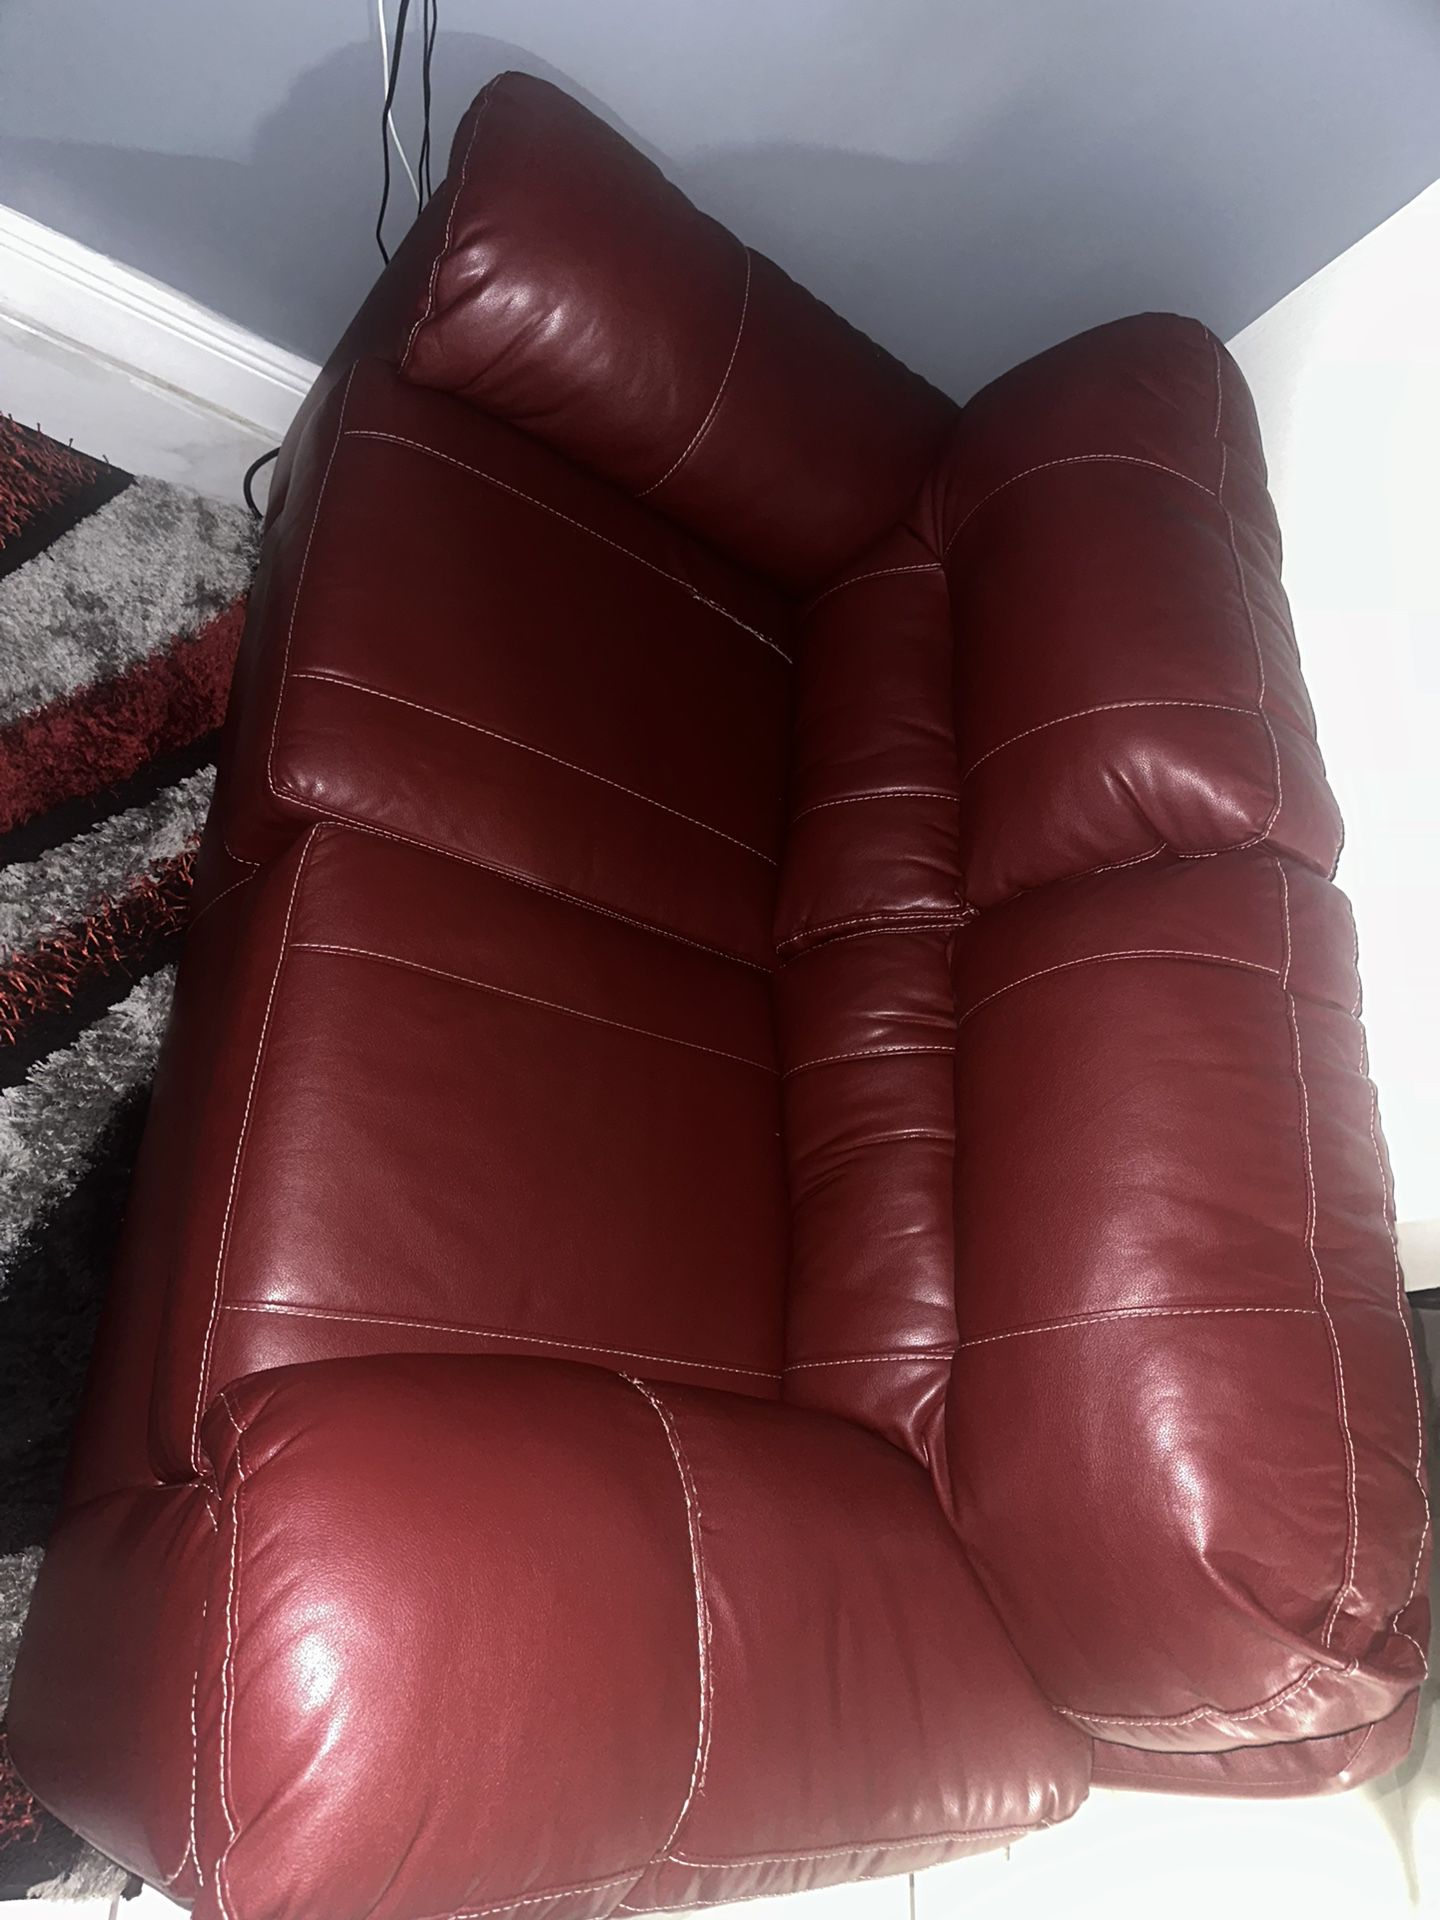 2 Couches For Sale (Red) Living Room Set (2)